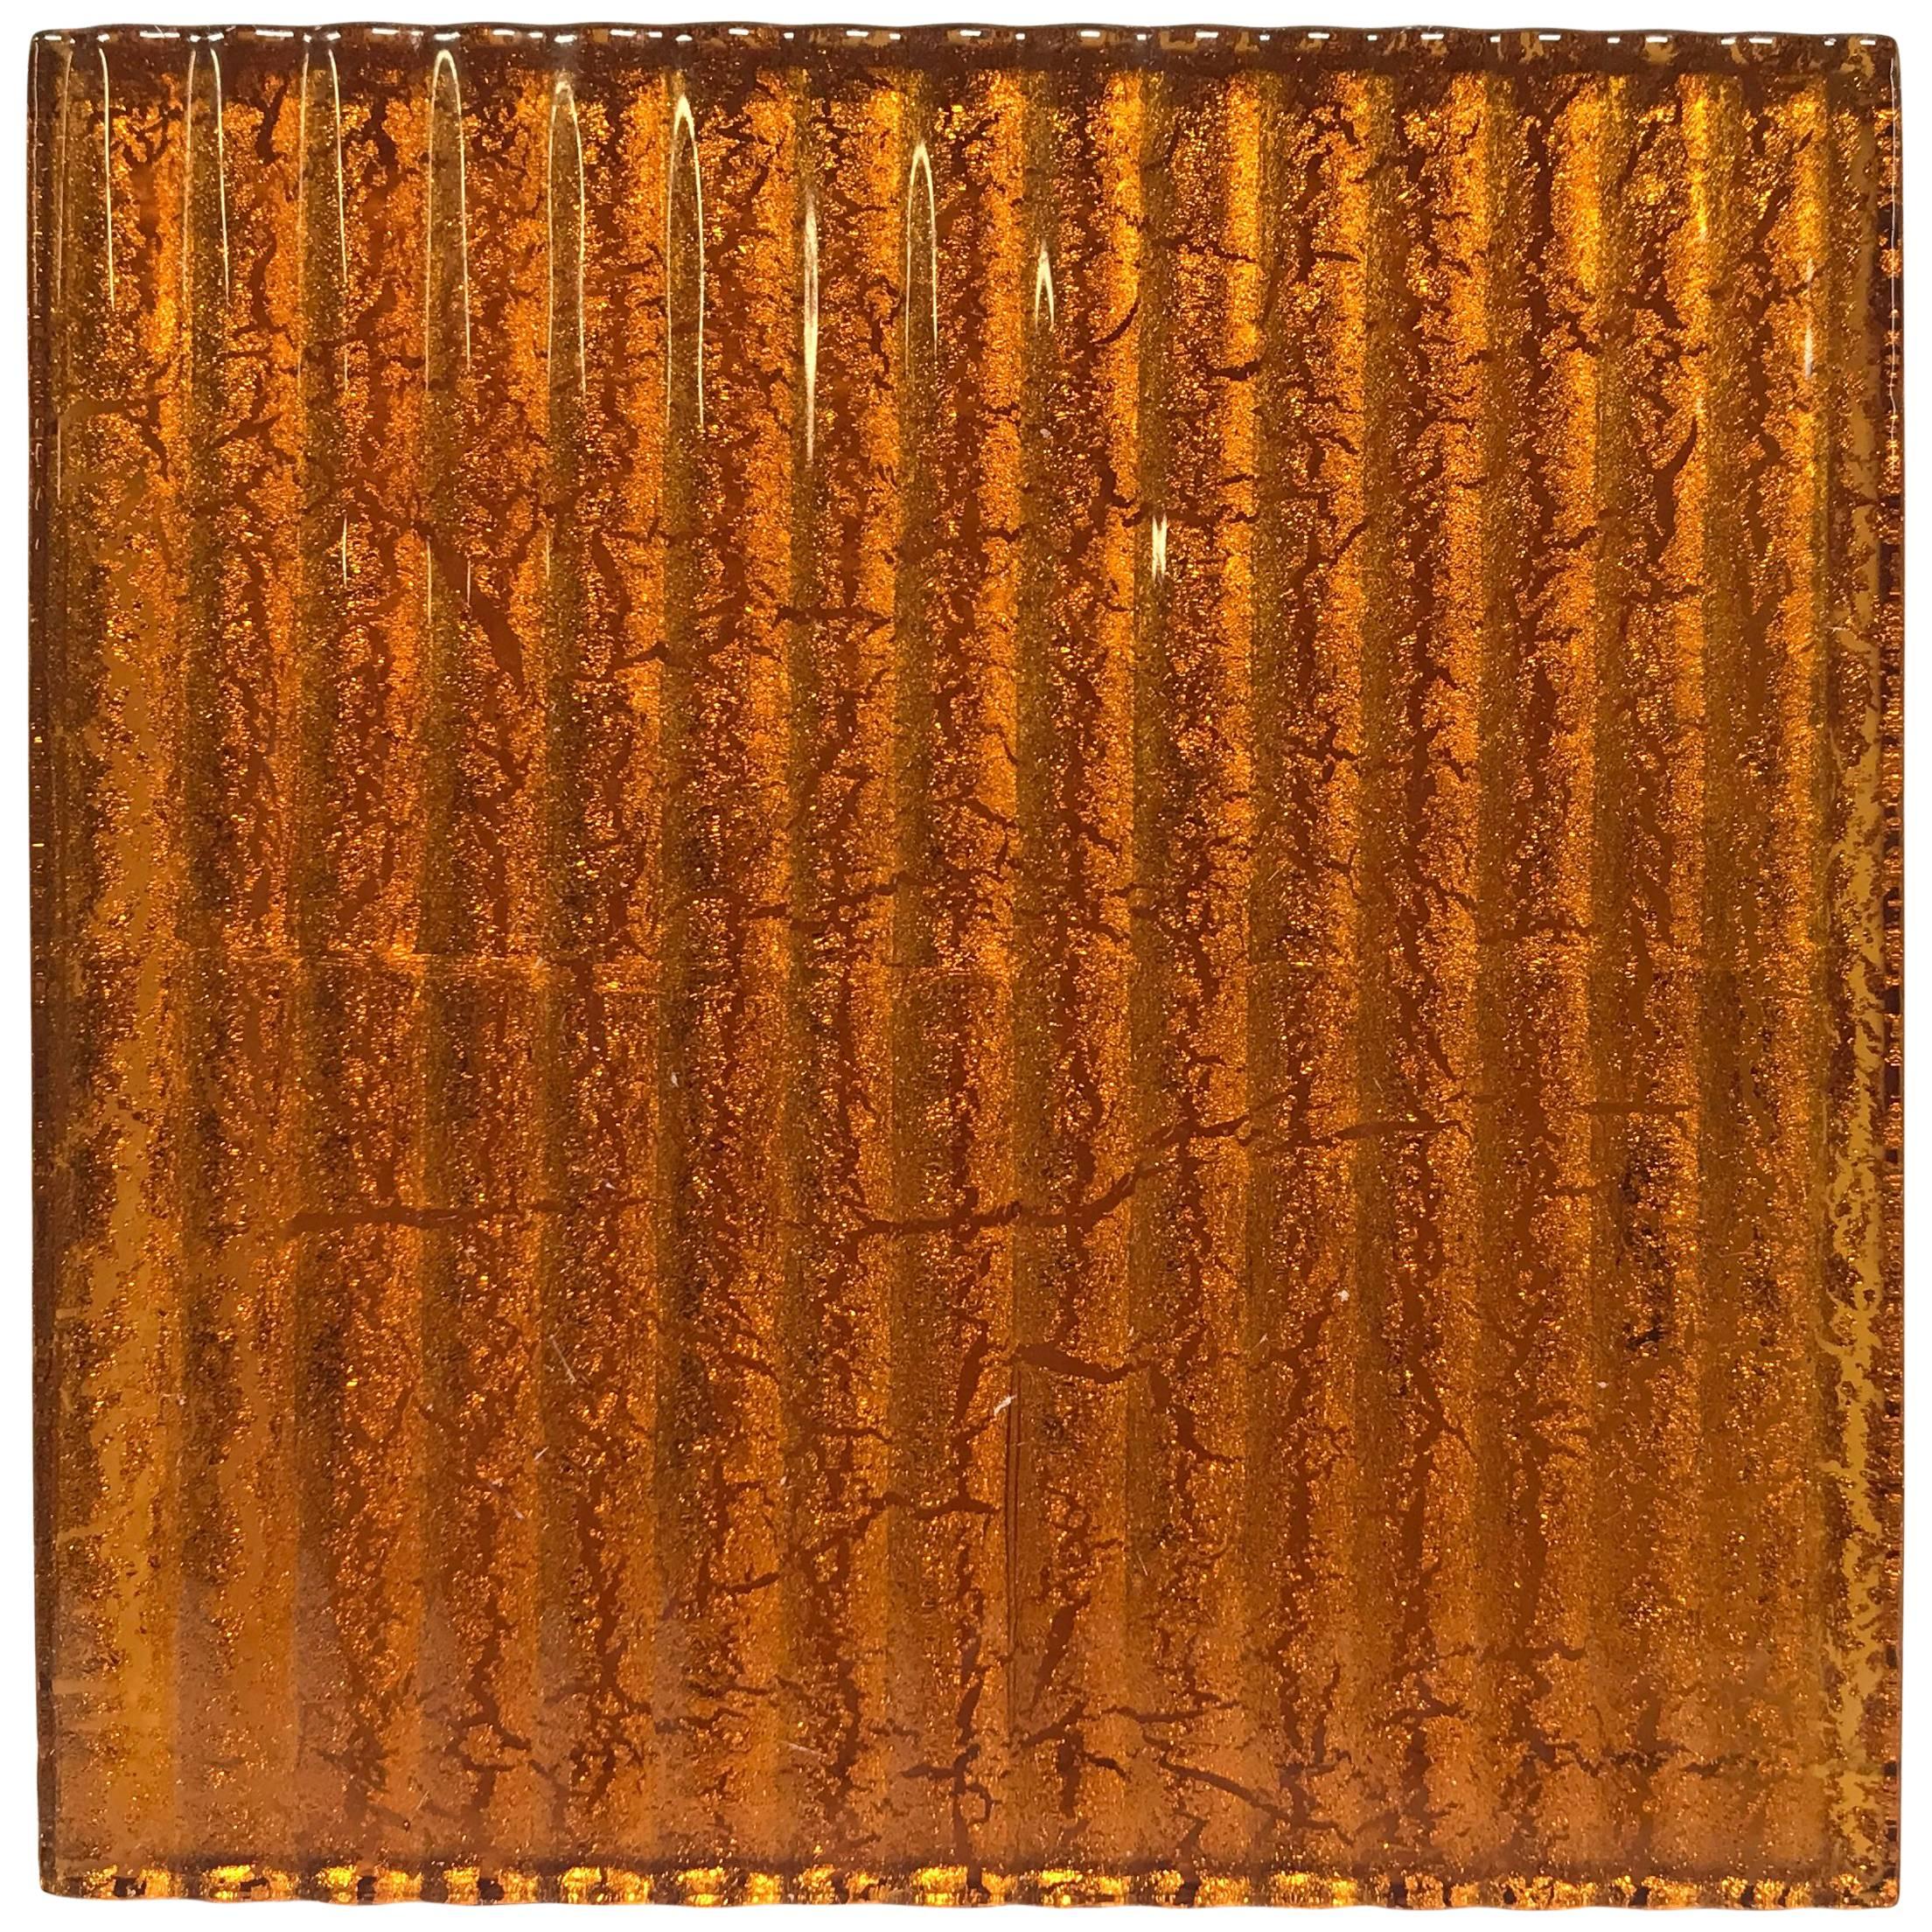 500 Murano Textured Glass Tiles in Orange, Italy, 2017 For Sale